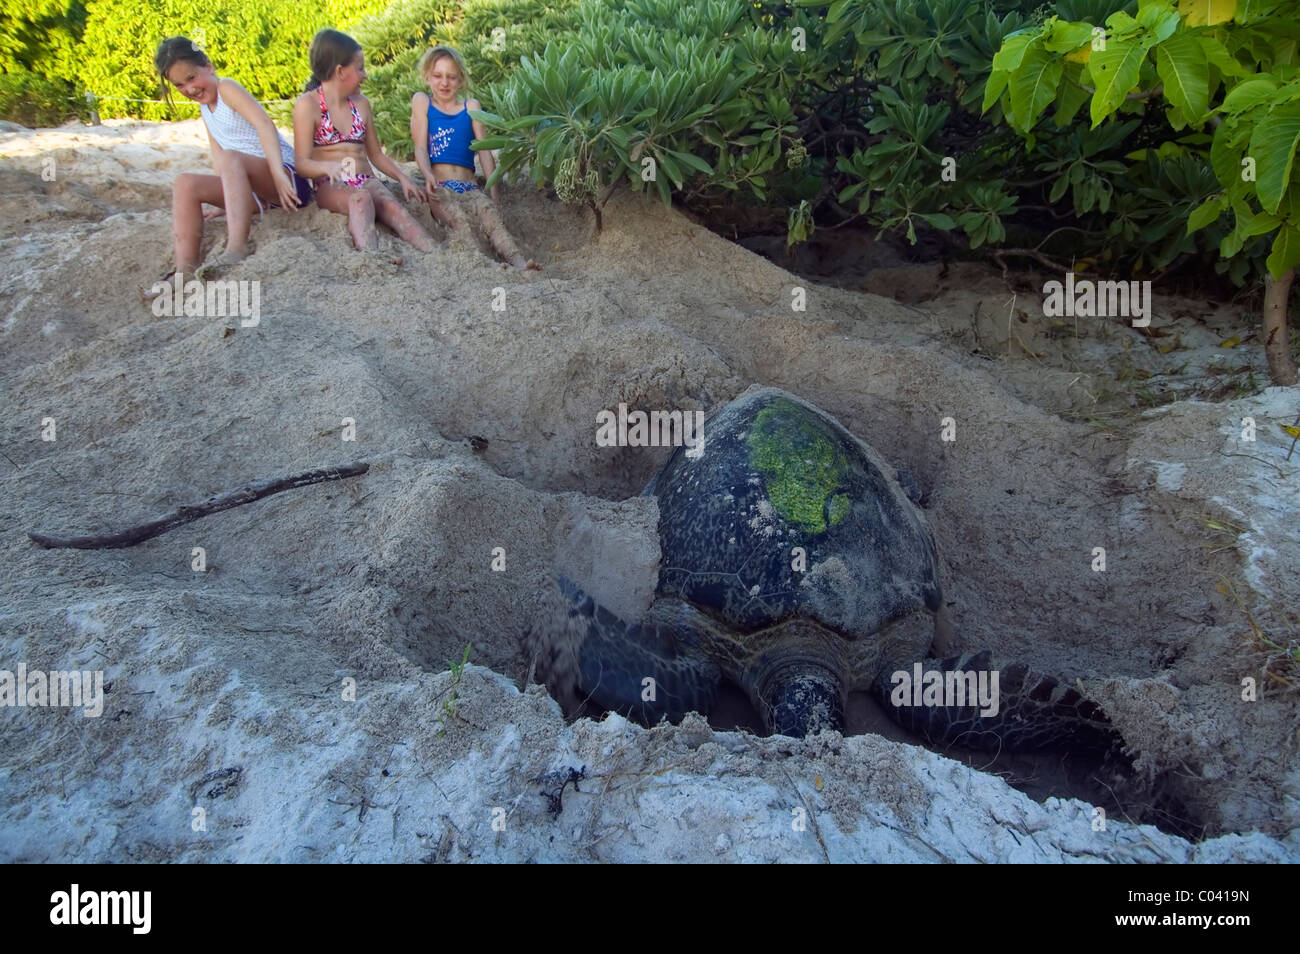 Girls being sprayed with sand by nesting green turtle (Chelonia mydas), North West Island, Great Barrier Reef, Australia Stock Photo